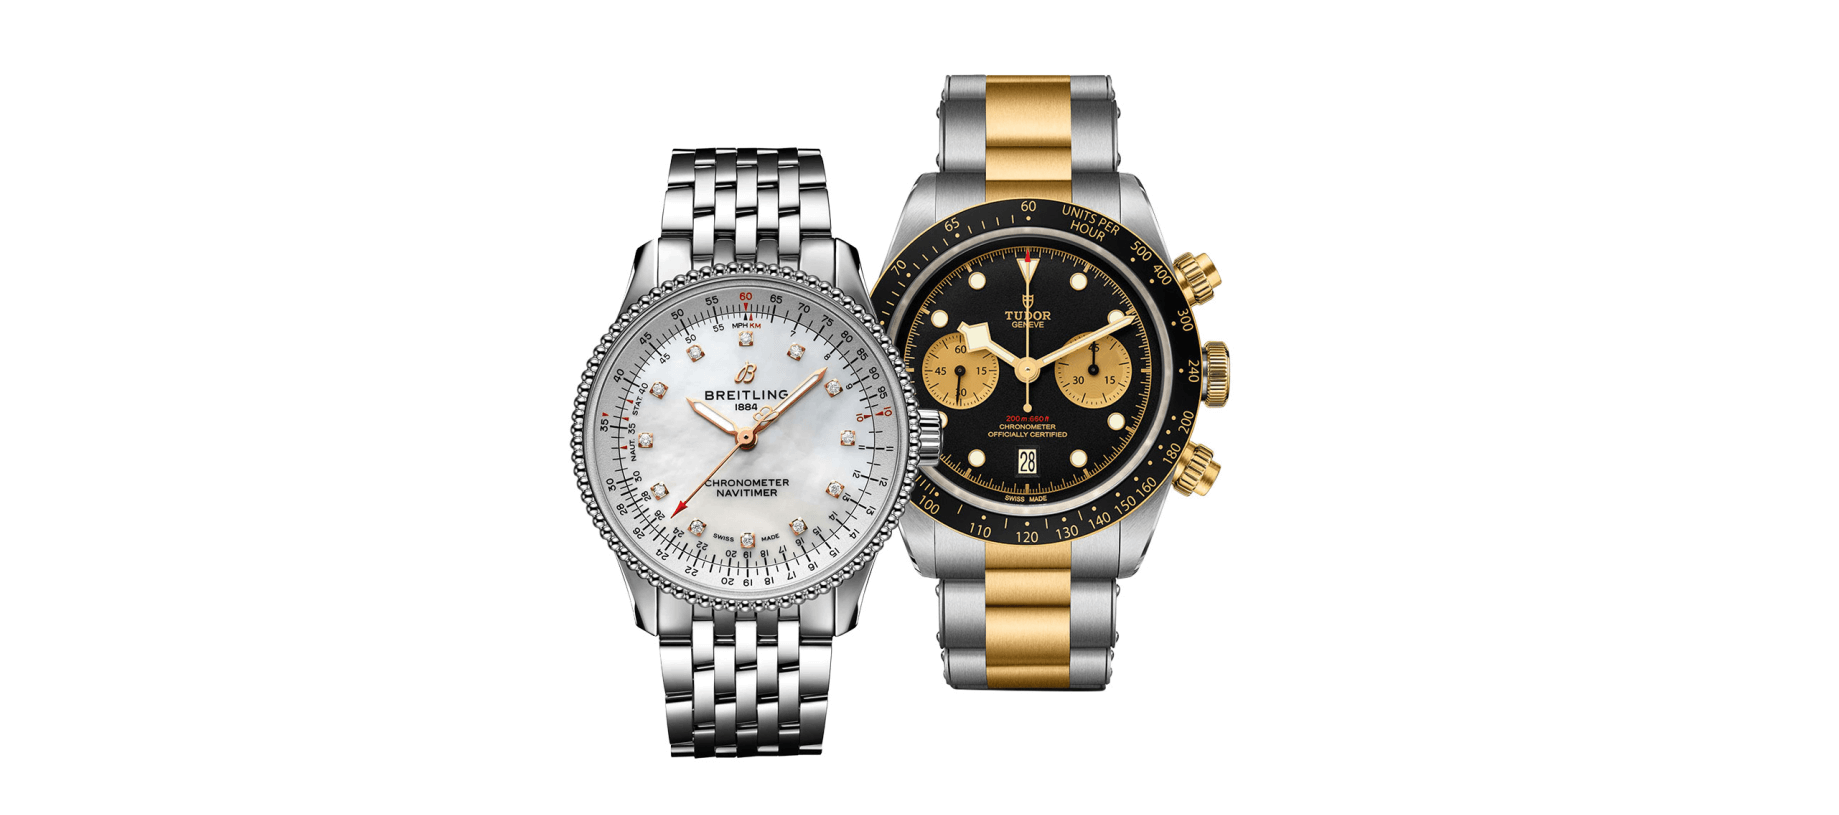 Breitling and Tudor Watches